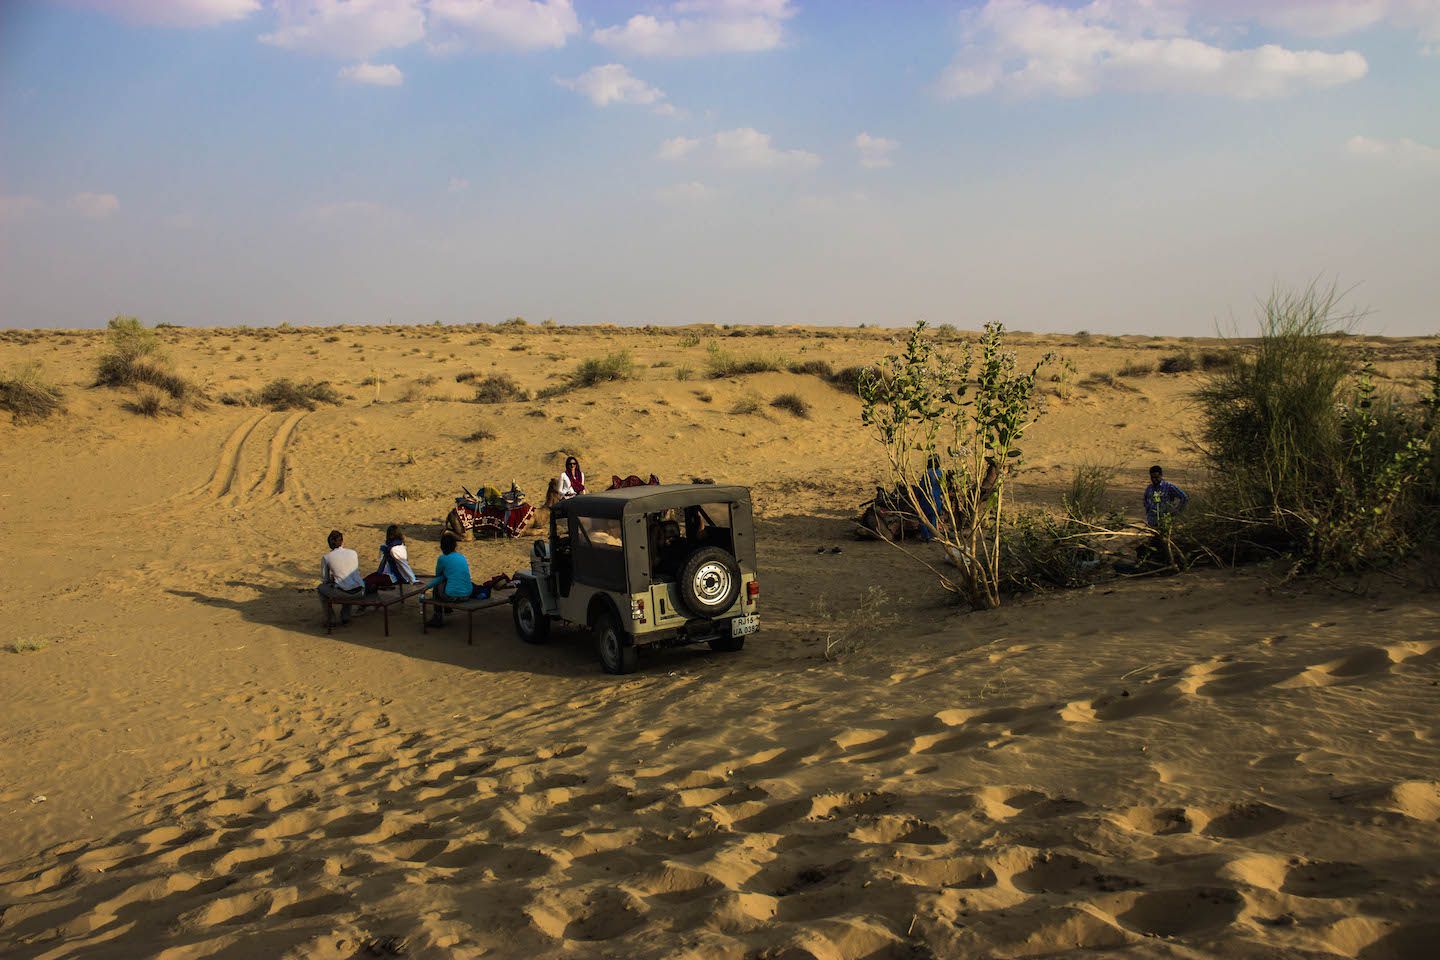 View of our camp in the Thar Desert, Jaisalmer, India